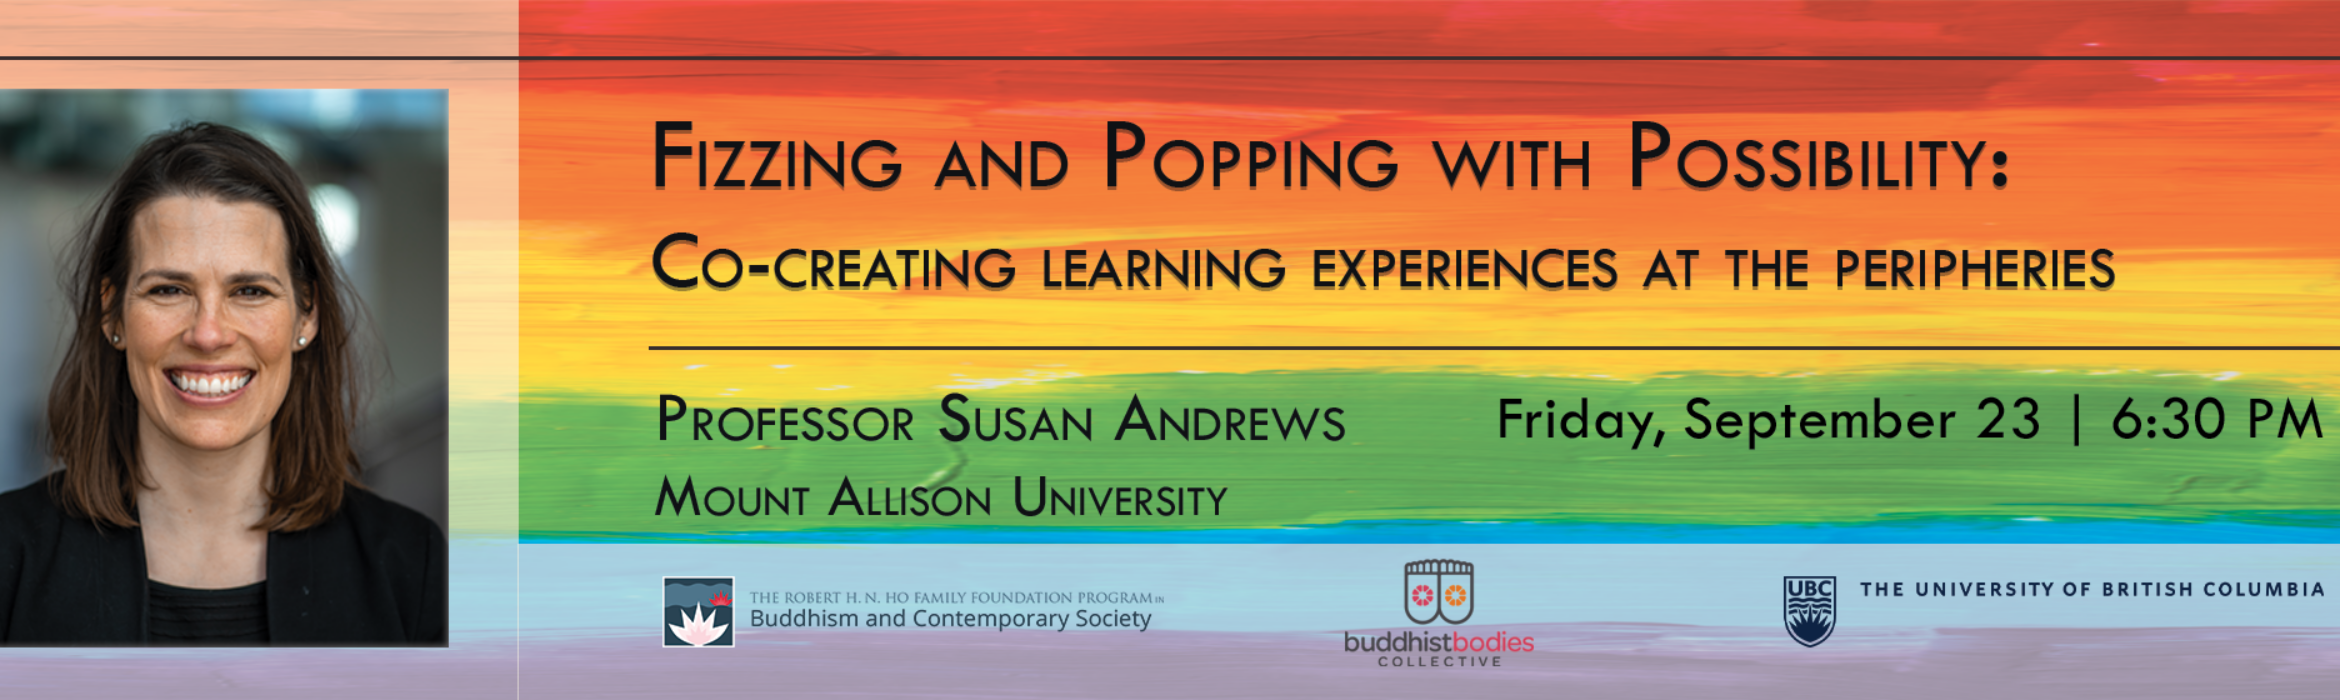 Fizzing and Popping with Possibility: Co-creating Learning Experiences at the Peripheries